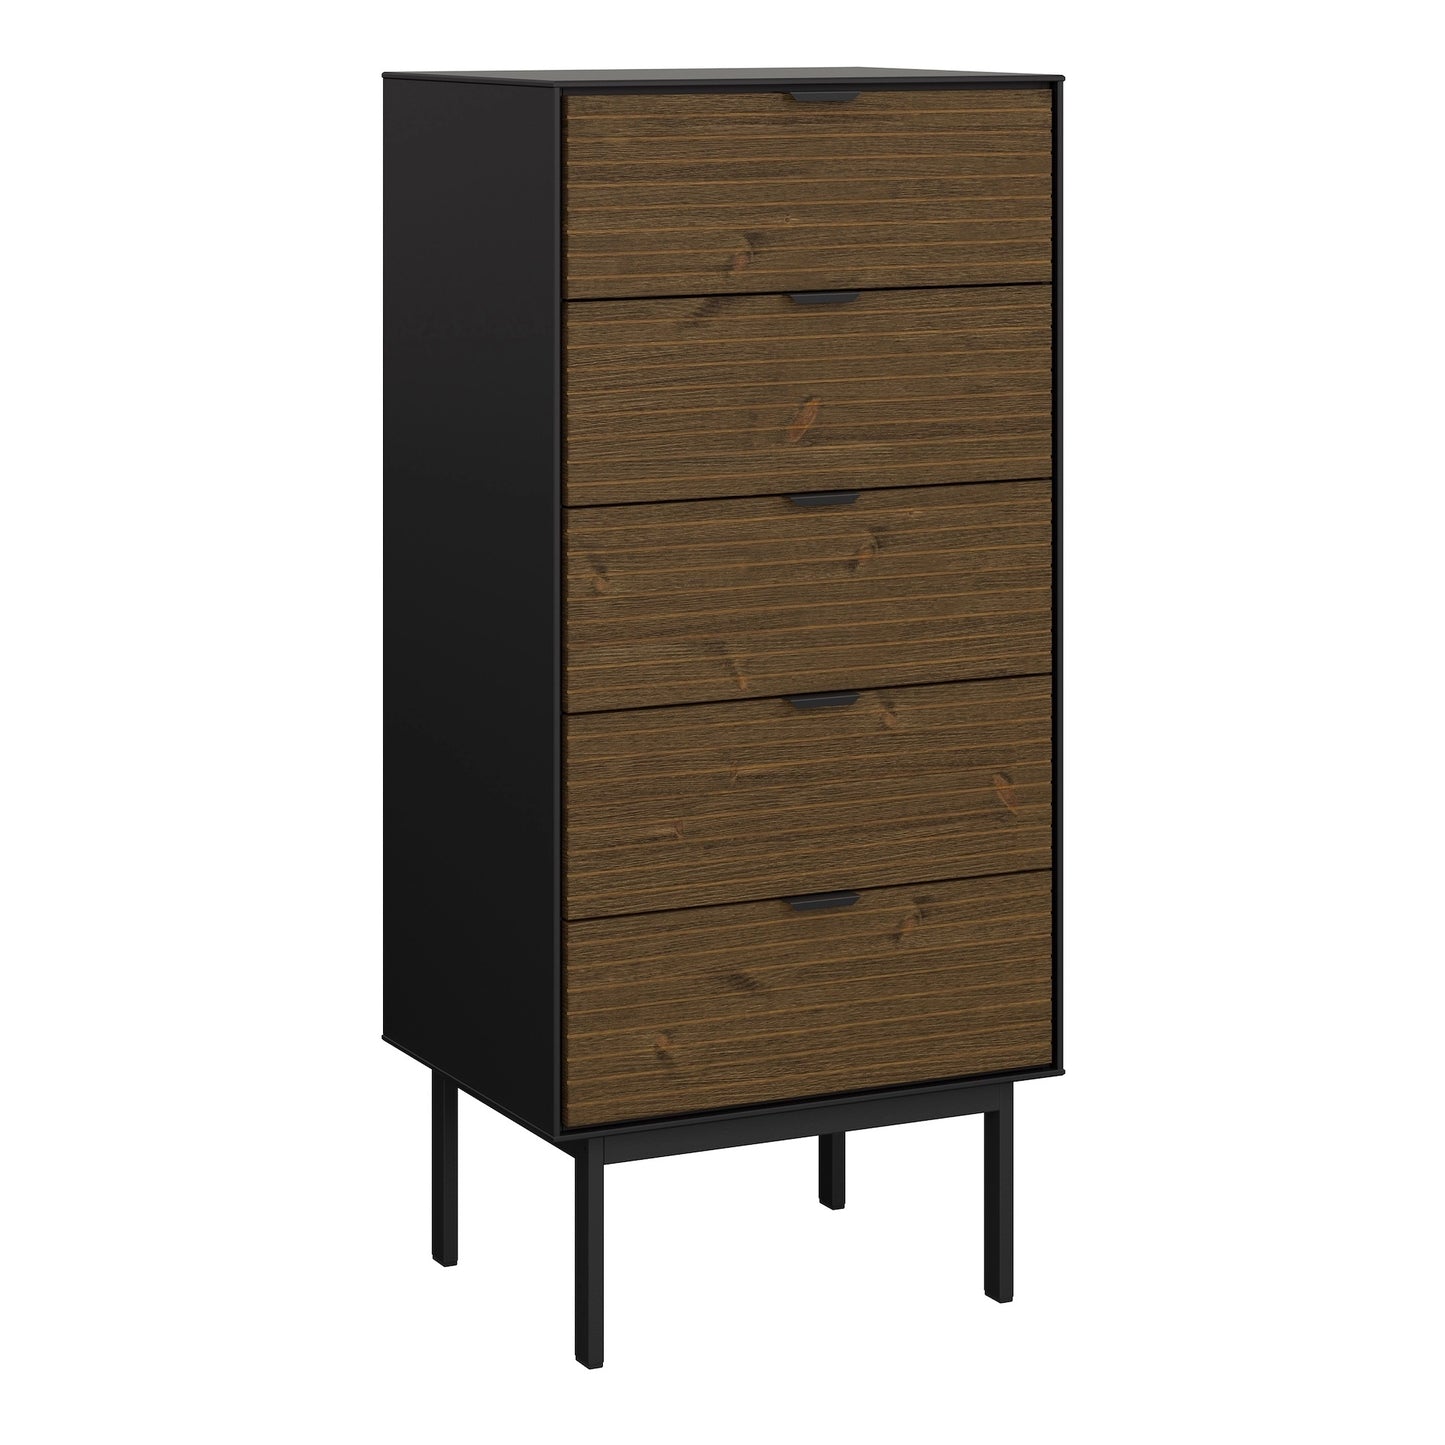 Furniture To Go Soma 5 Drawers Narrow Chest Granulated Black Brushed Espresso